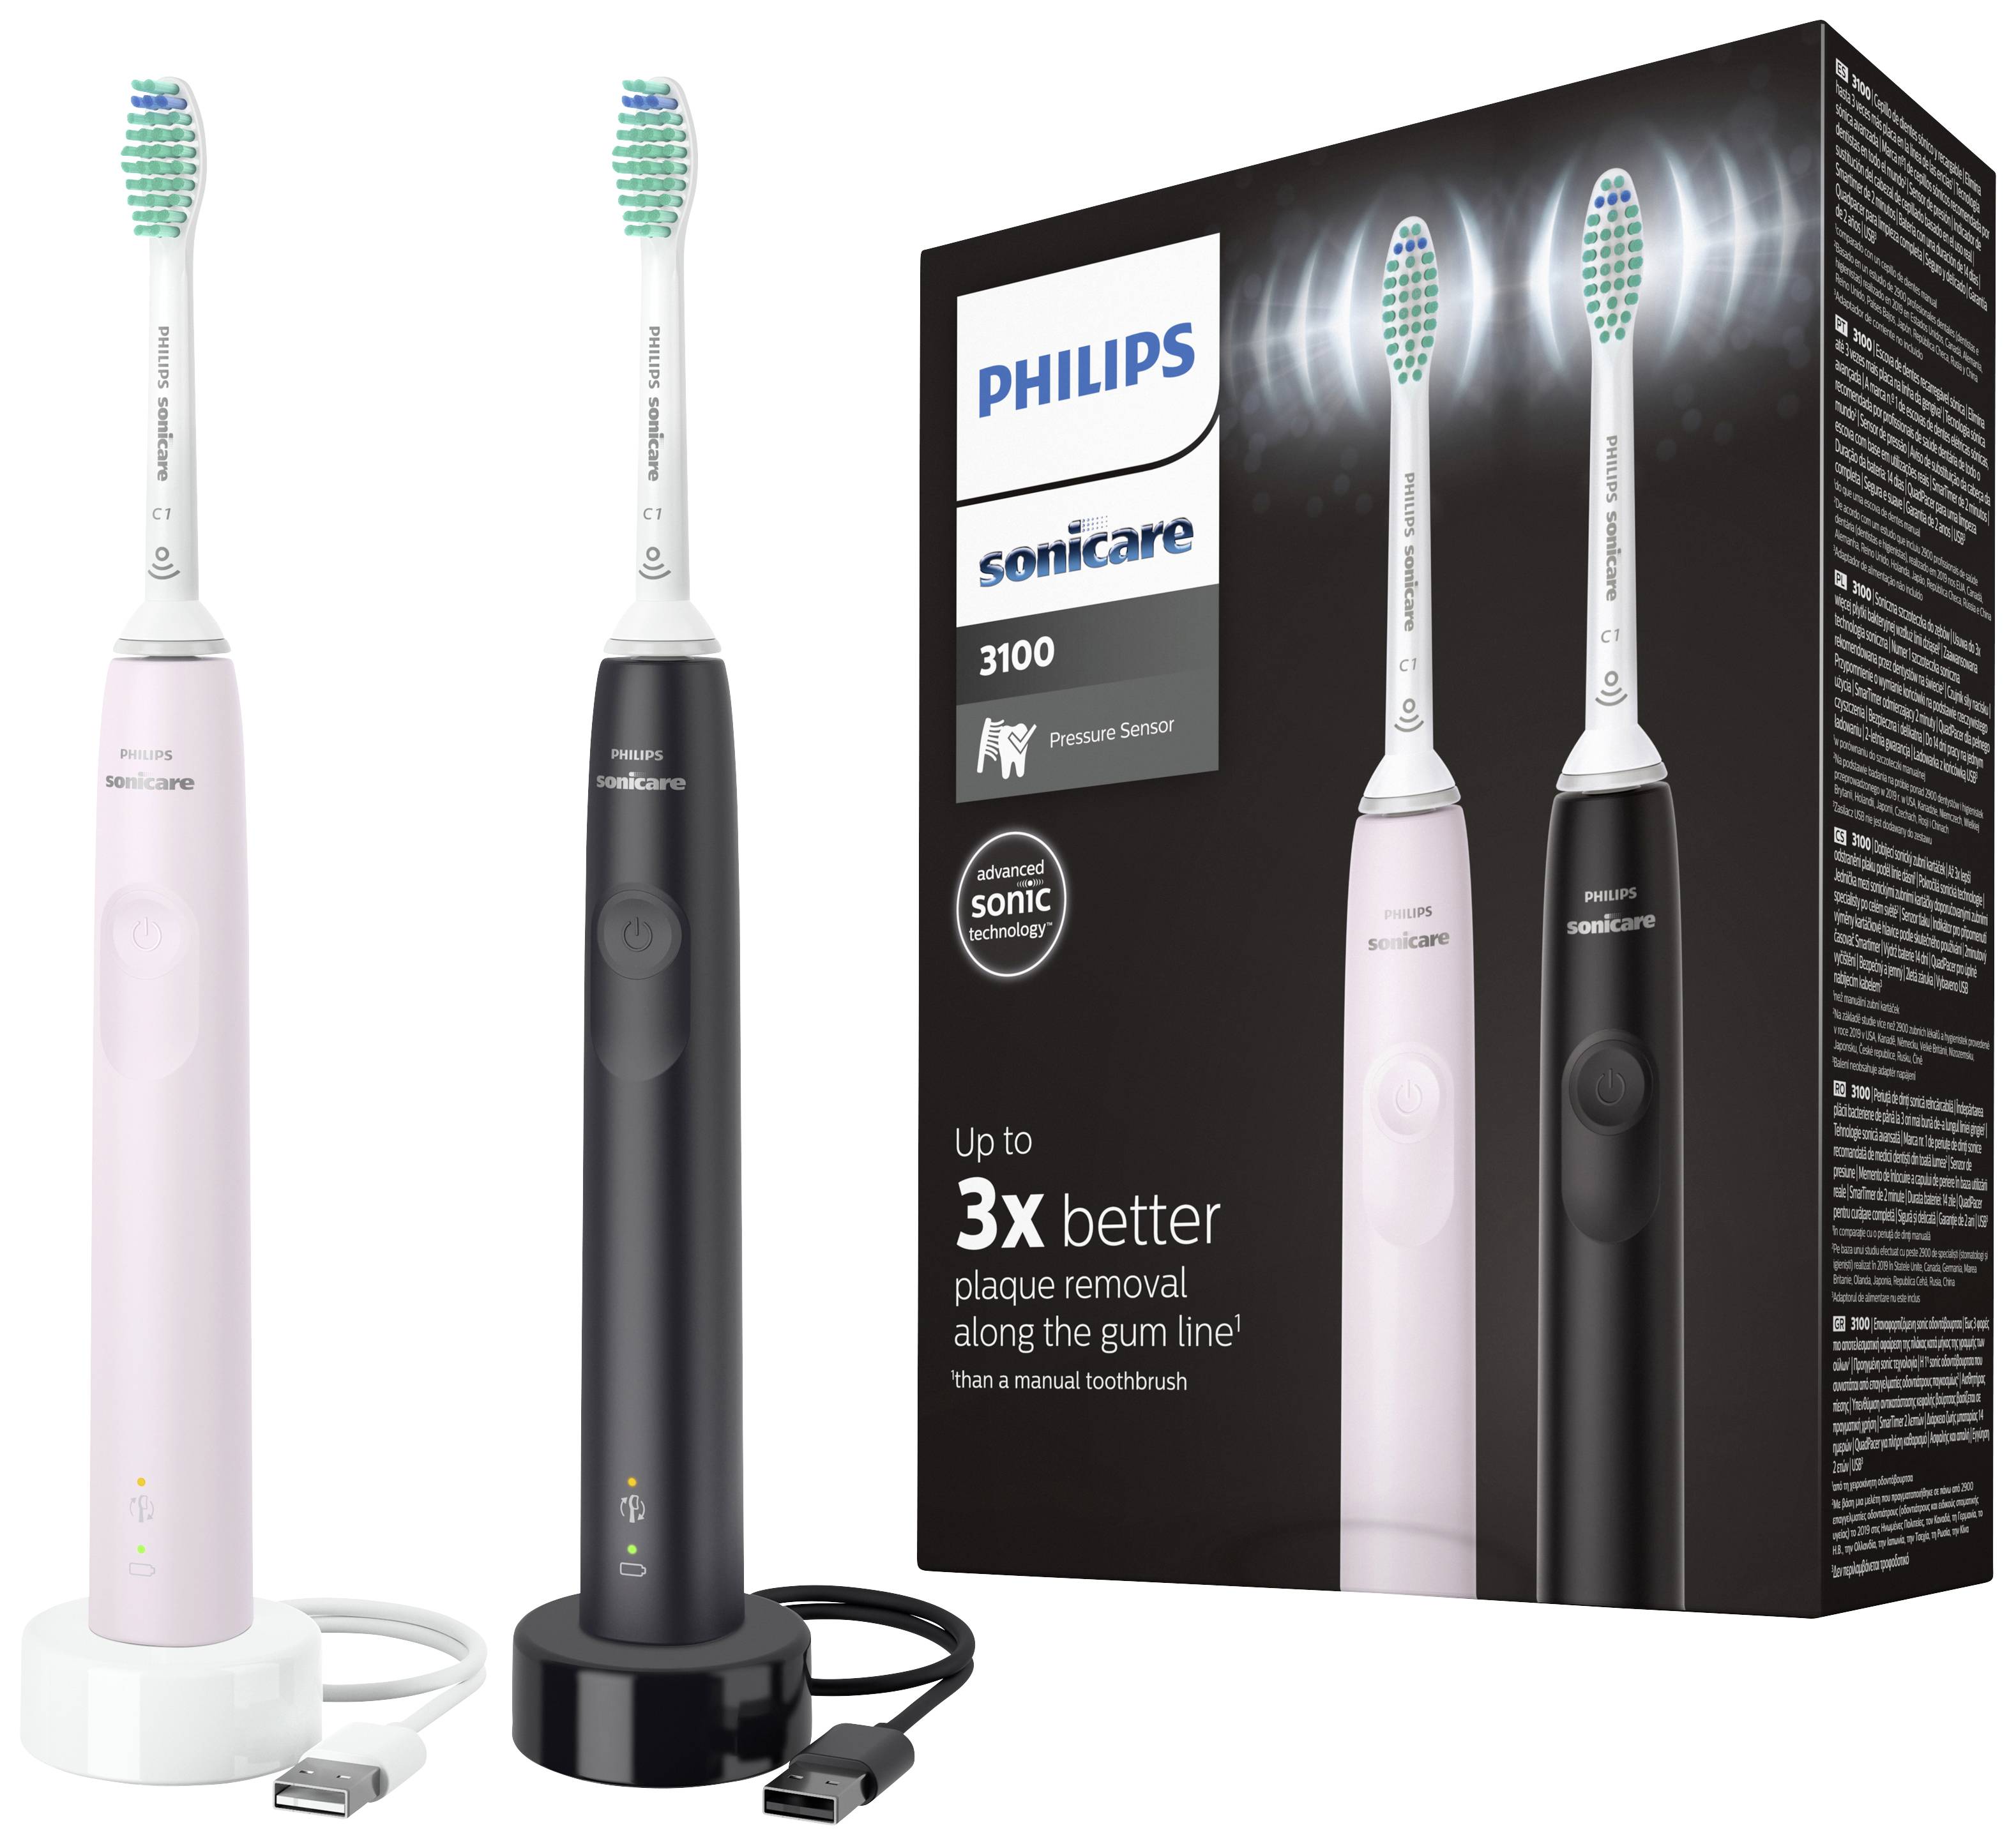 Philips Sonicare Serie 3100 HX3675/15 Electric toothbrush Sonic toothbrush  Black, White